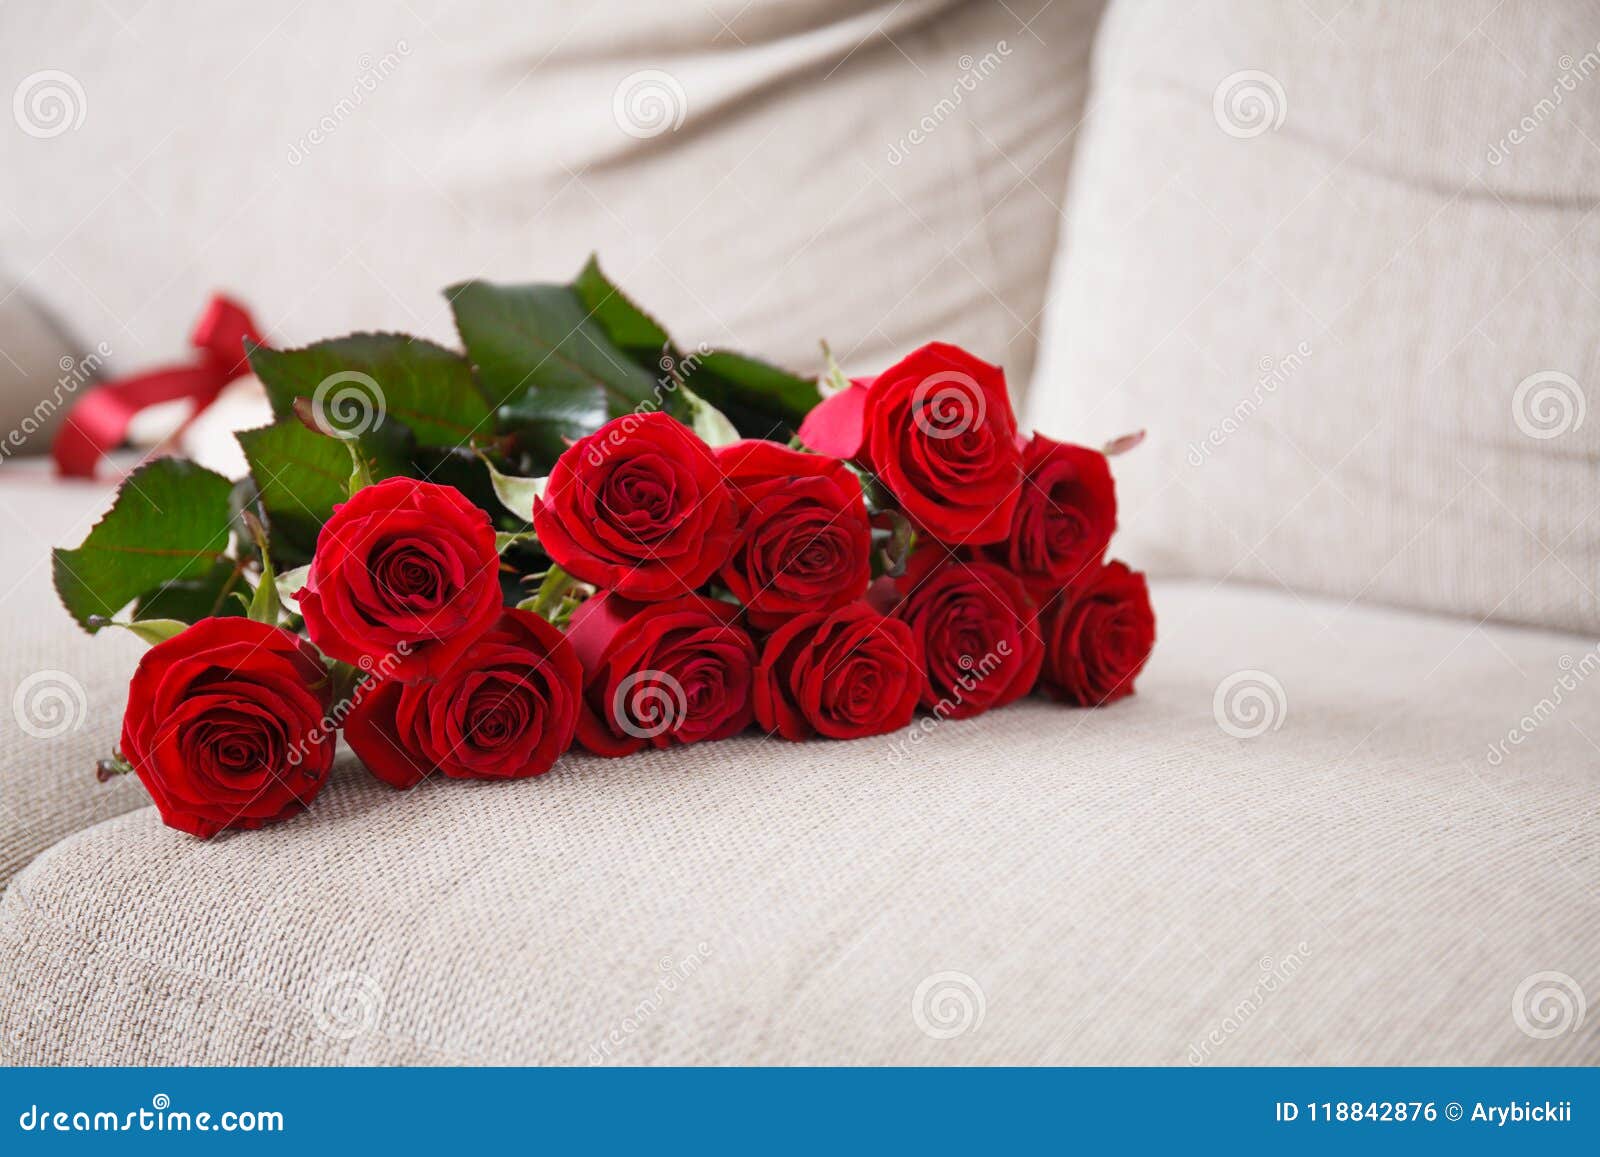 Big bouquet red roses stock photo. Image of romantic - 118842876